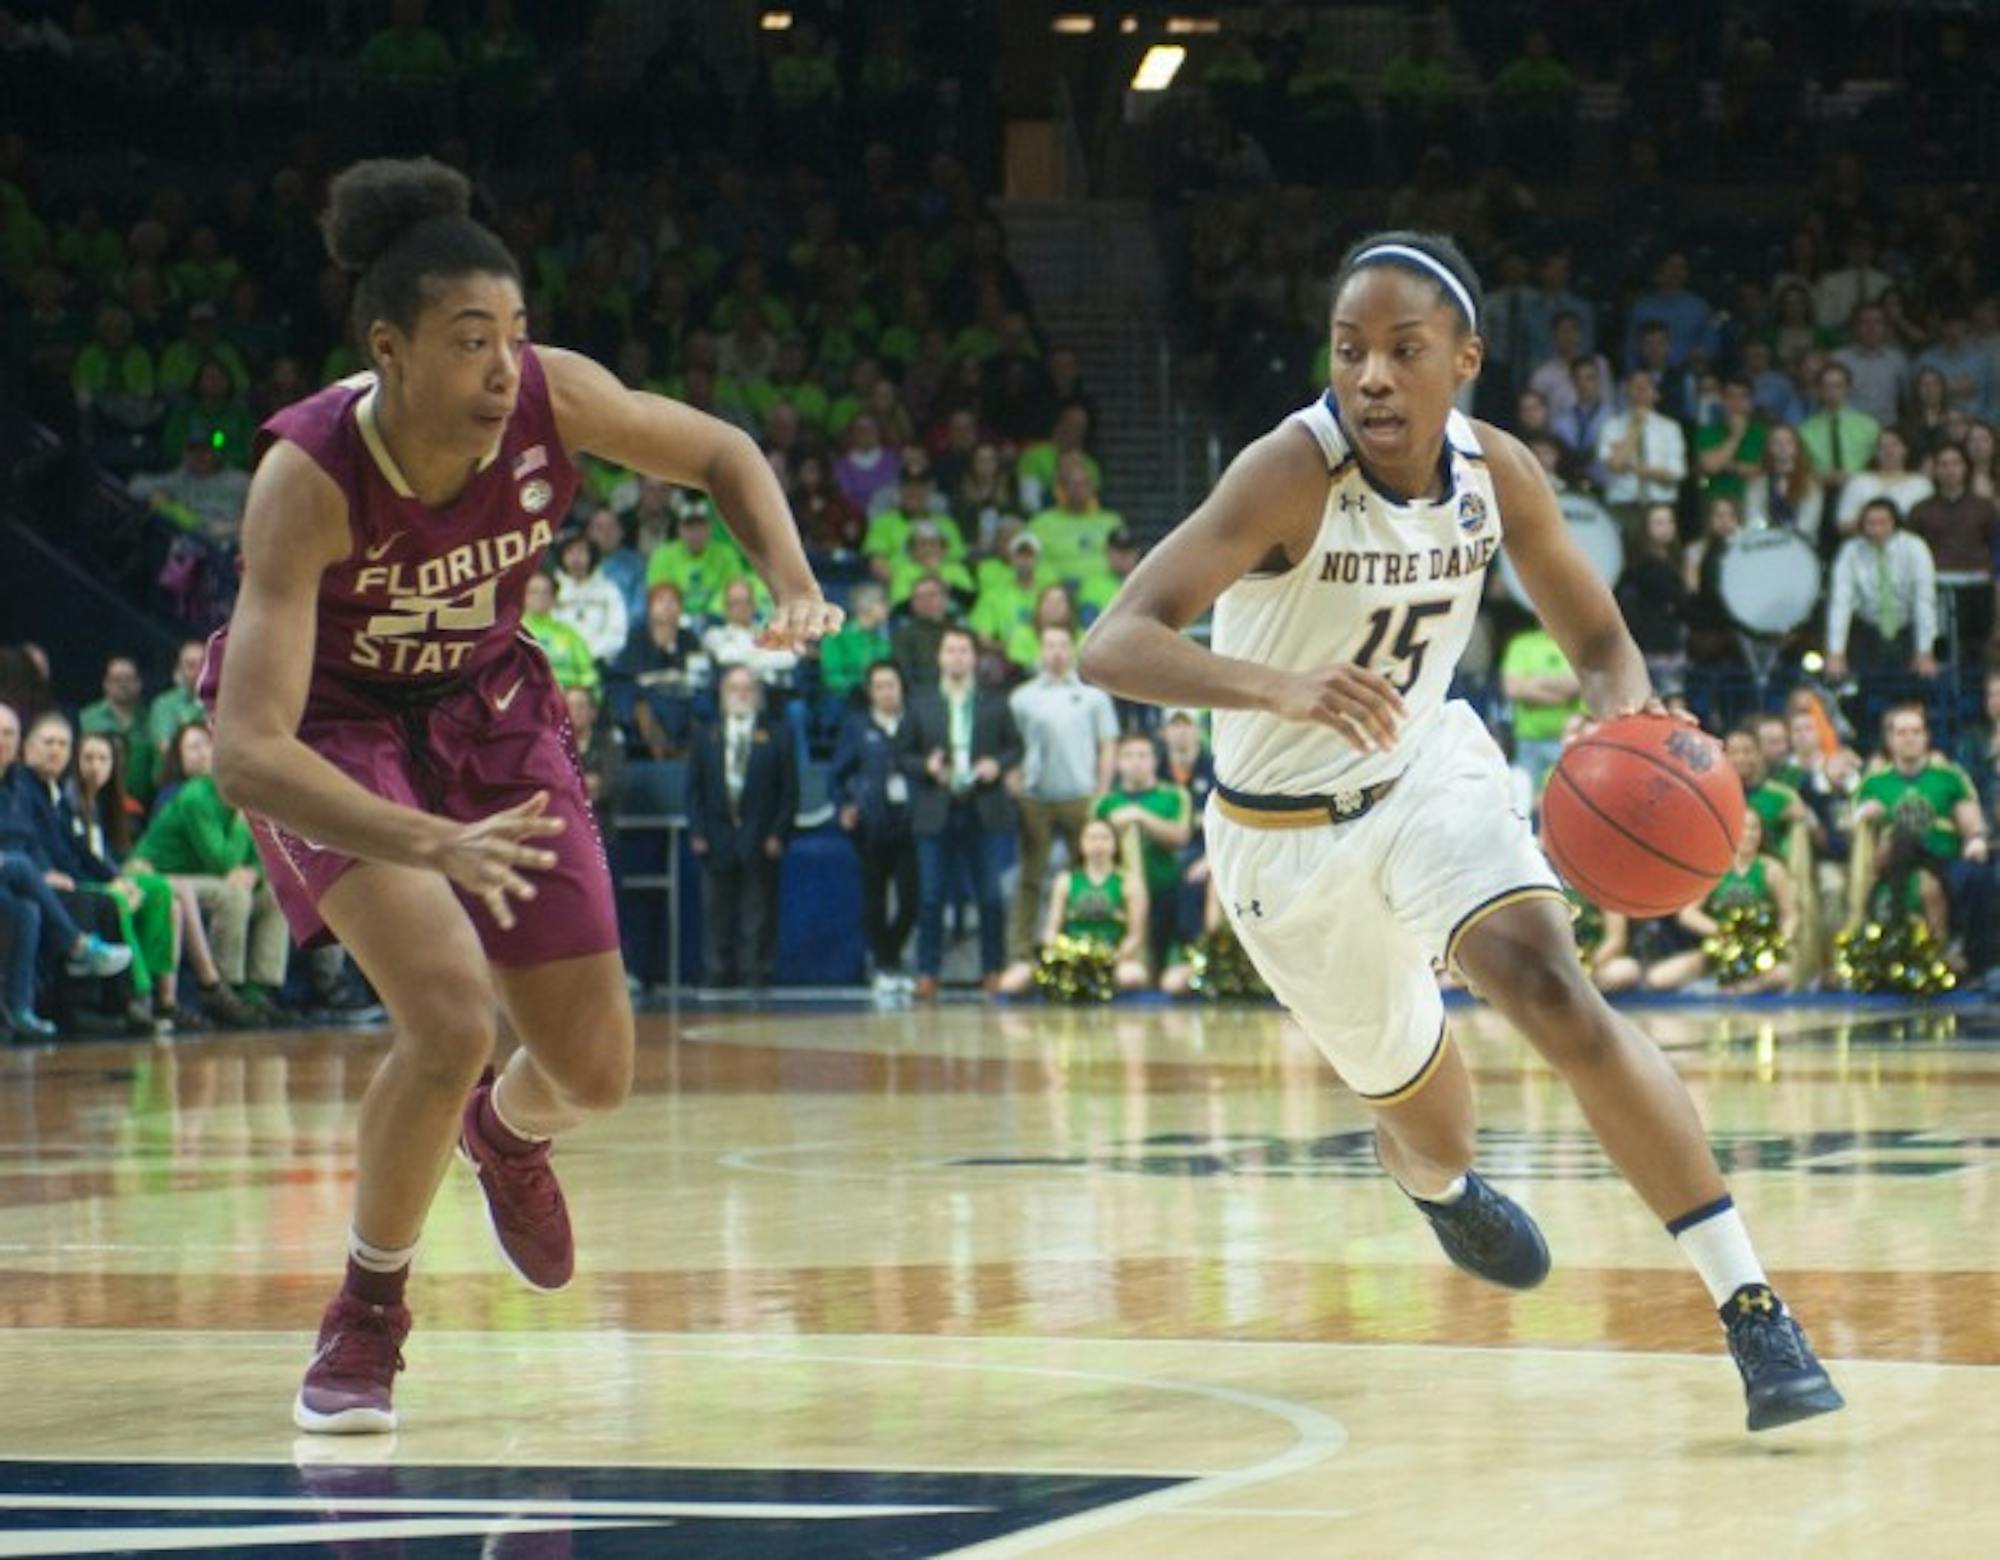 Irish senior guard Lindsay Allen dribbles past a defender during Notre Dame’s 79-61 win over Florida State on Feb. 26 at Purcell Pavilion.